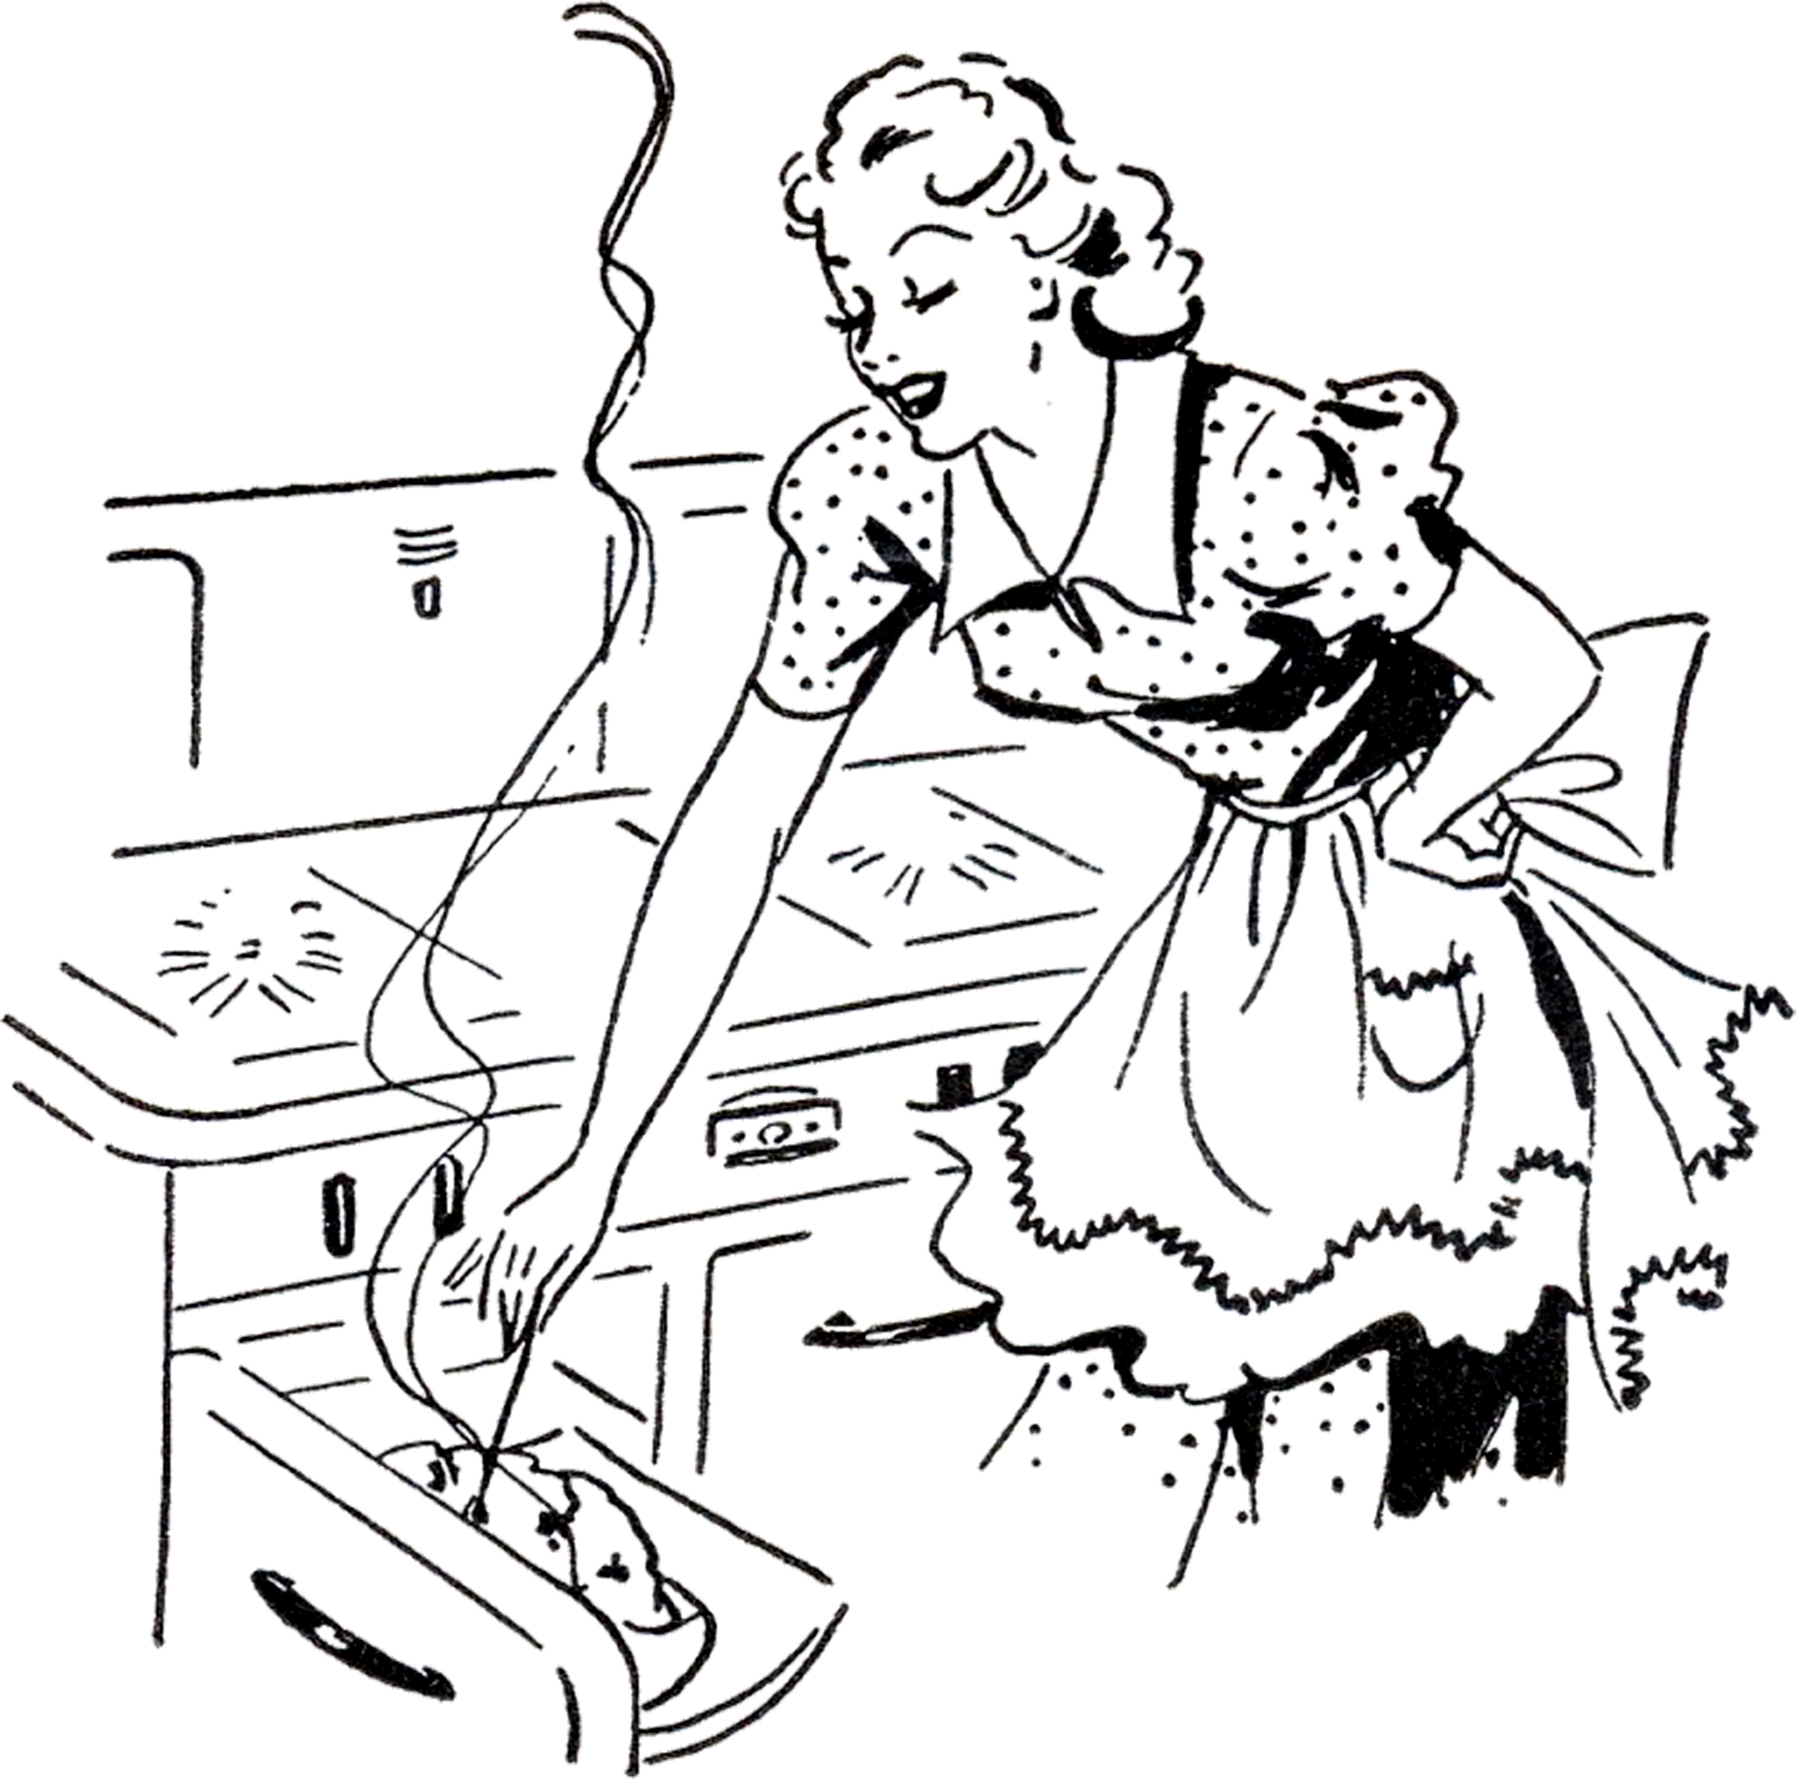 This Is An Adorable Retro Cooking Mom Image This Cute Lady Is Cooking